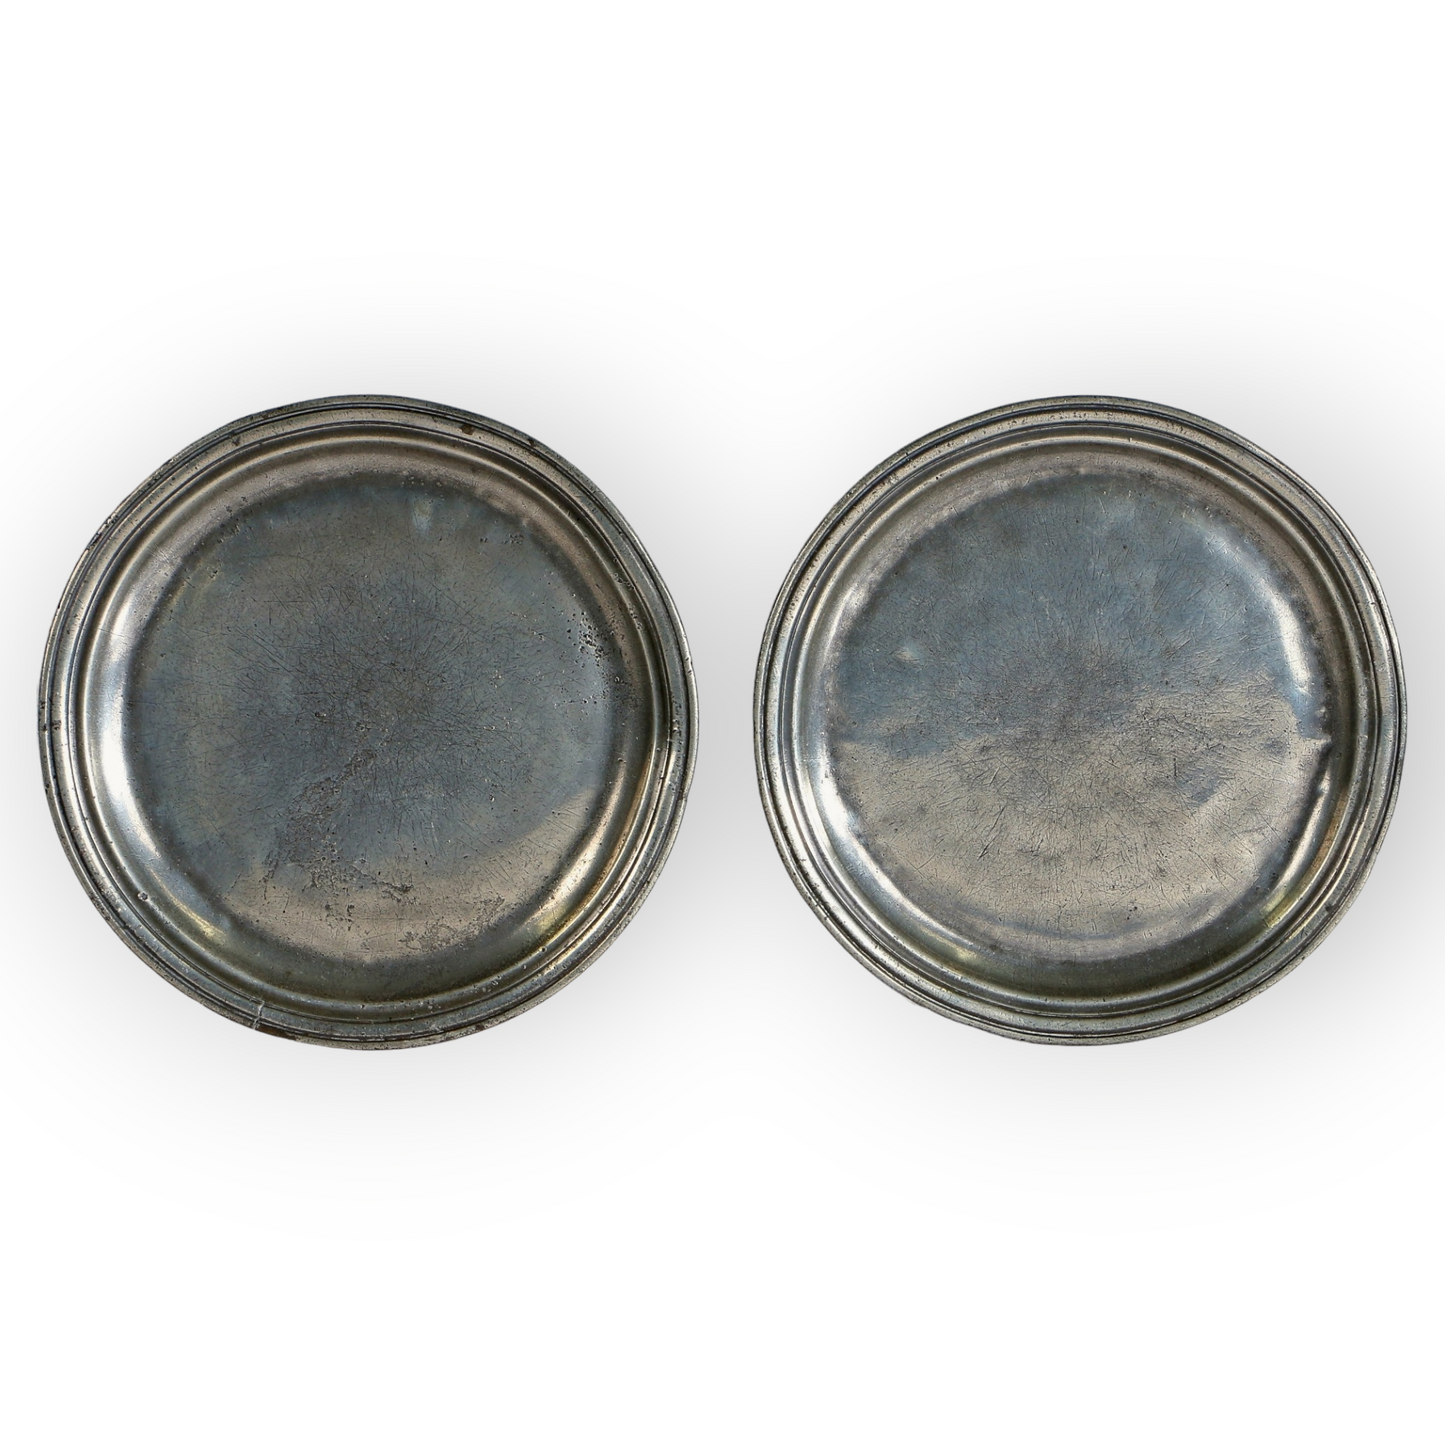 A Pair of Late 17th Century William & Mary Period English Antique Pewter Narrow-Rim Multi-Reeded Plates, Each With The Touchmark of William Gilly of Bury St. Edmunds, Suffolk